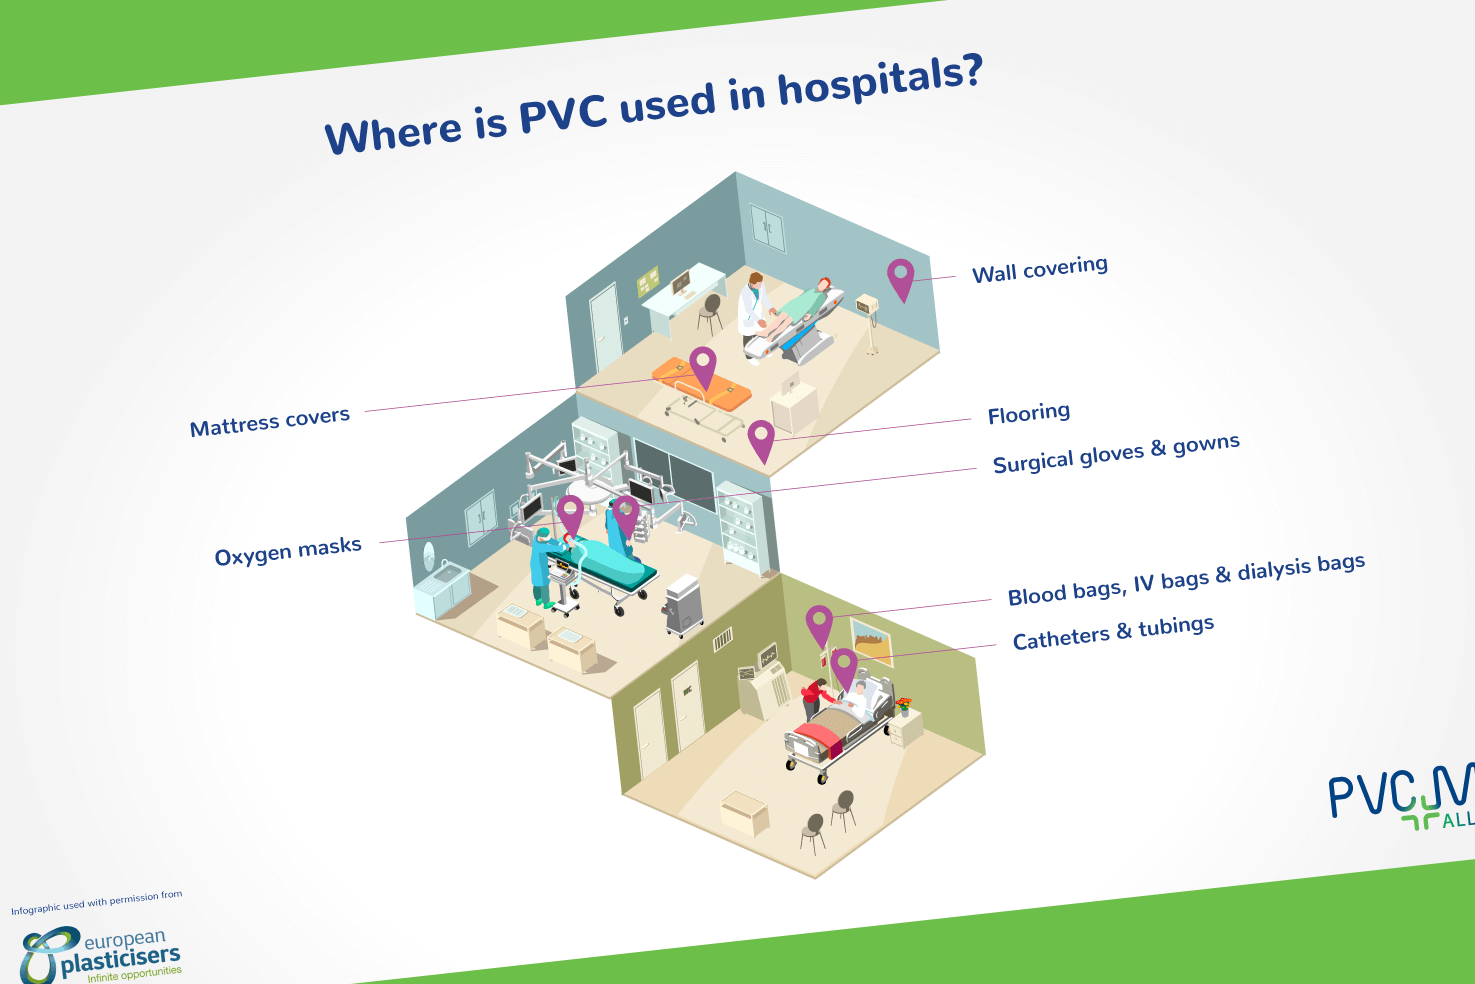 where-is-pvc-used-in-hospitals_bg_green_1900x1200